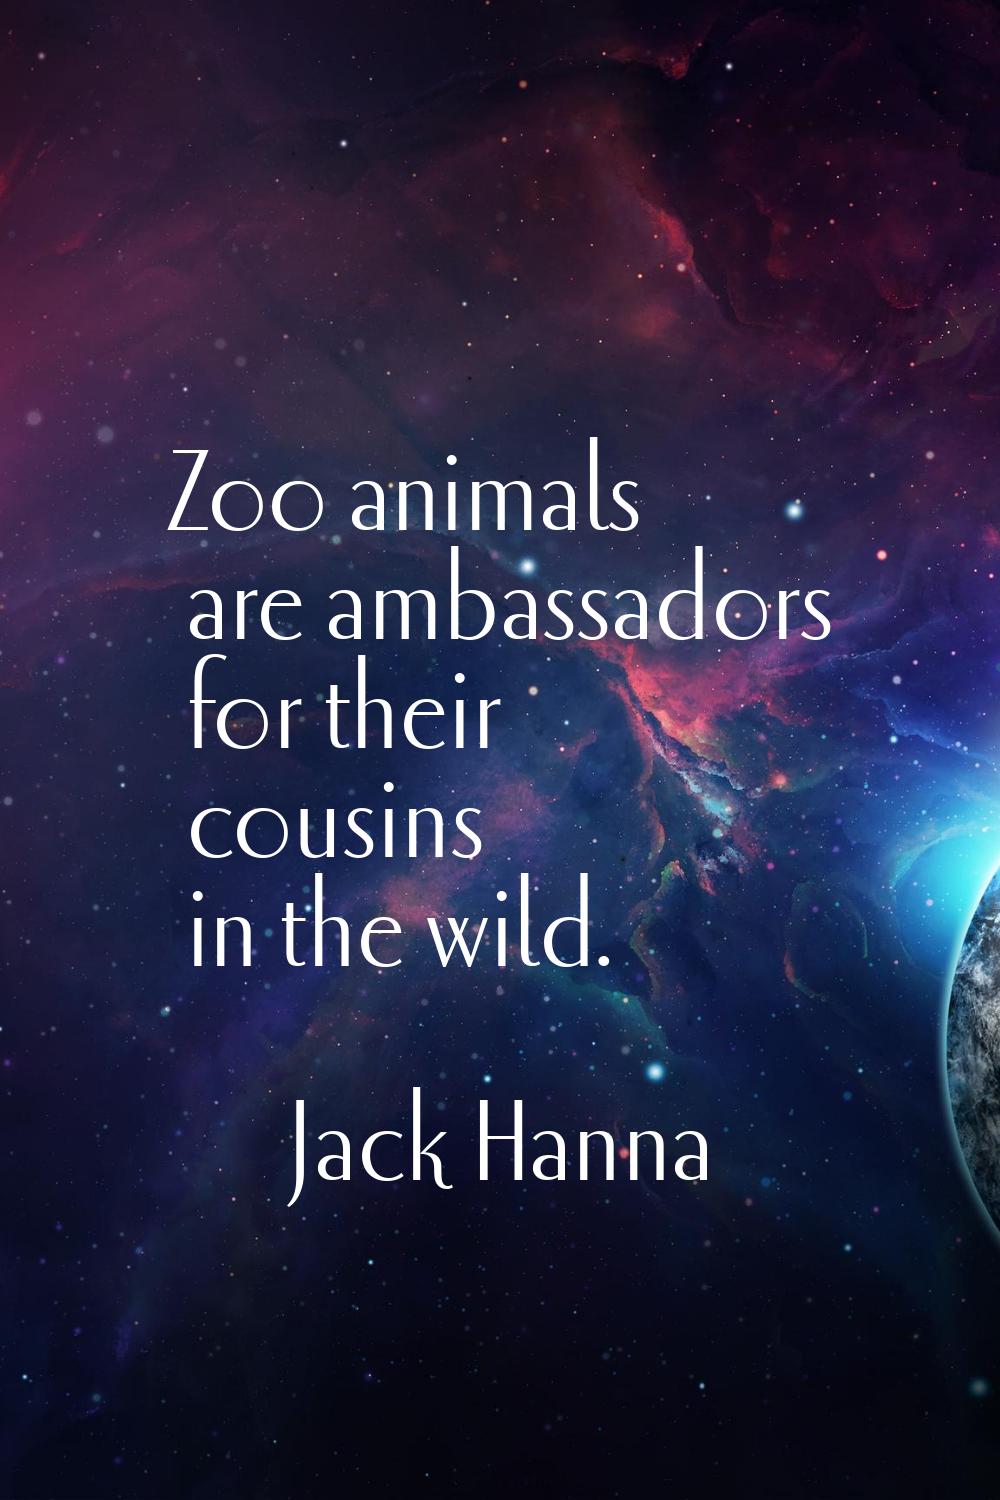 Zoo animals are ambassadors for their cousins in the wild.